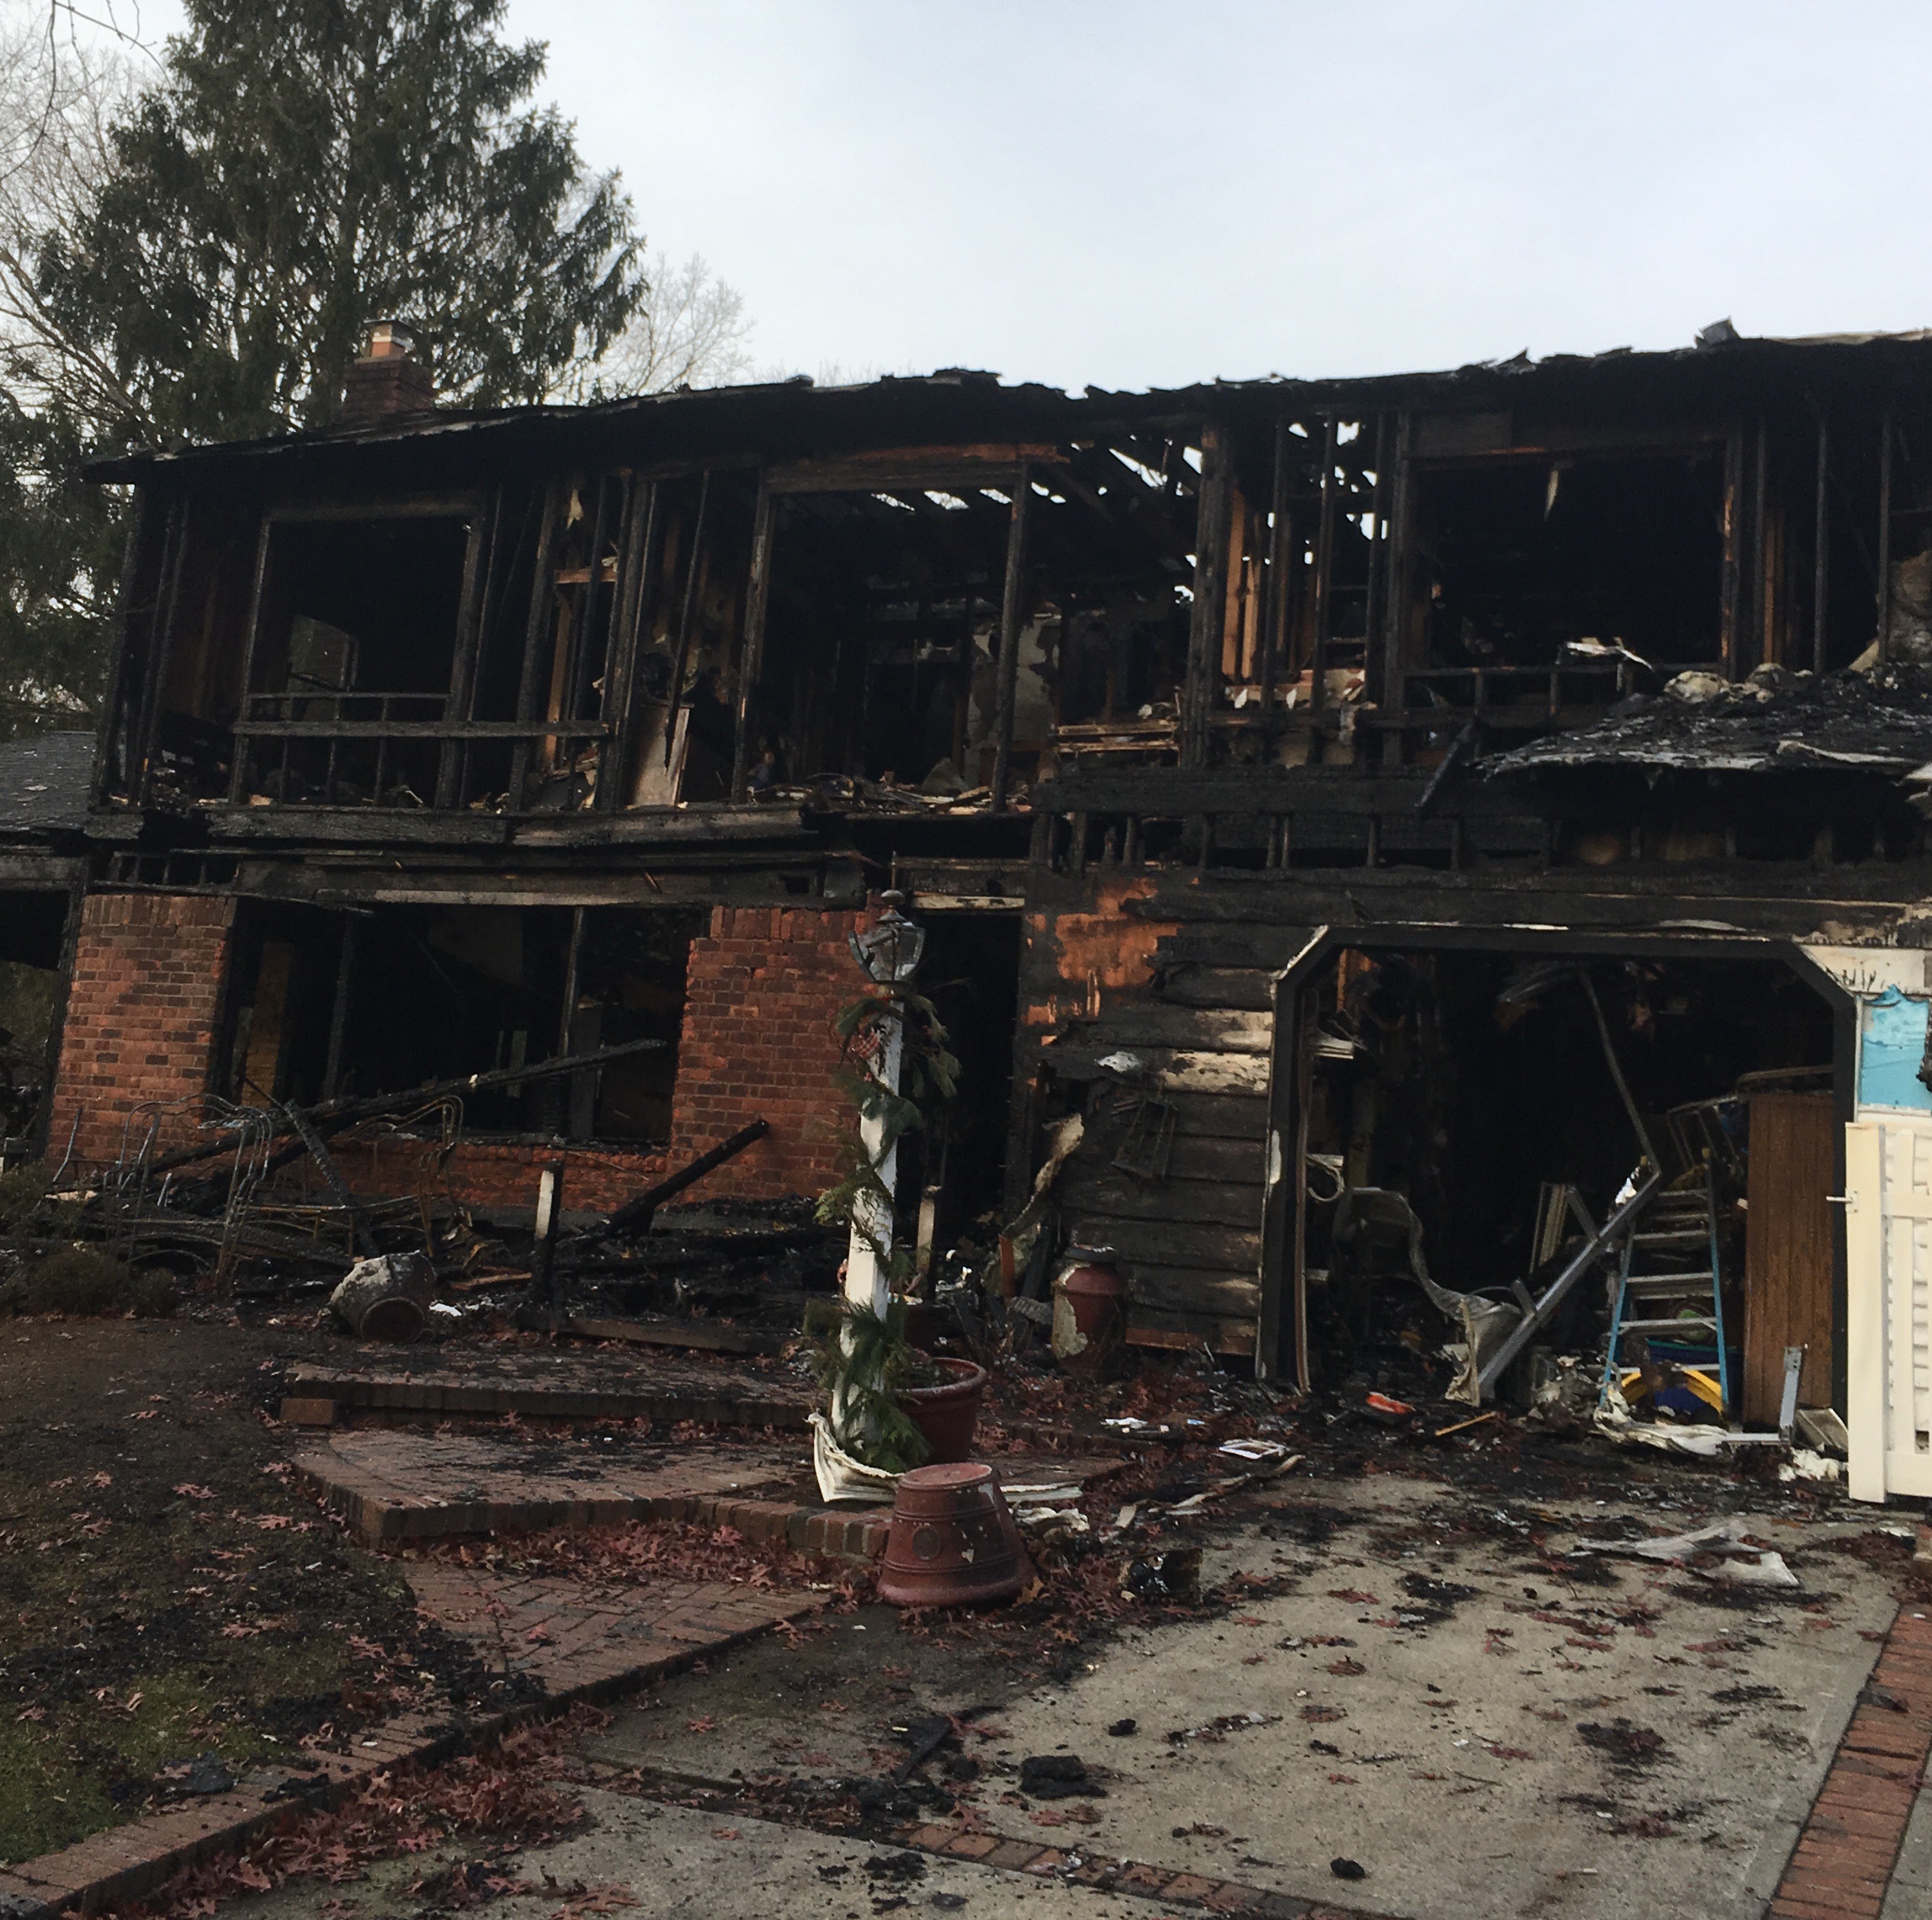 Community raises $58K for Cardillo after fire